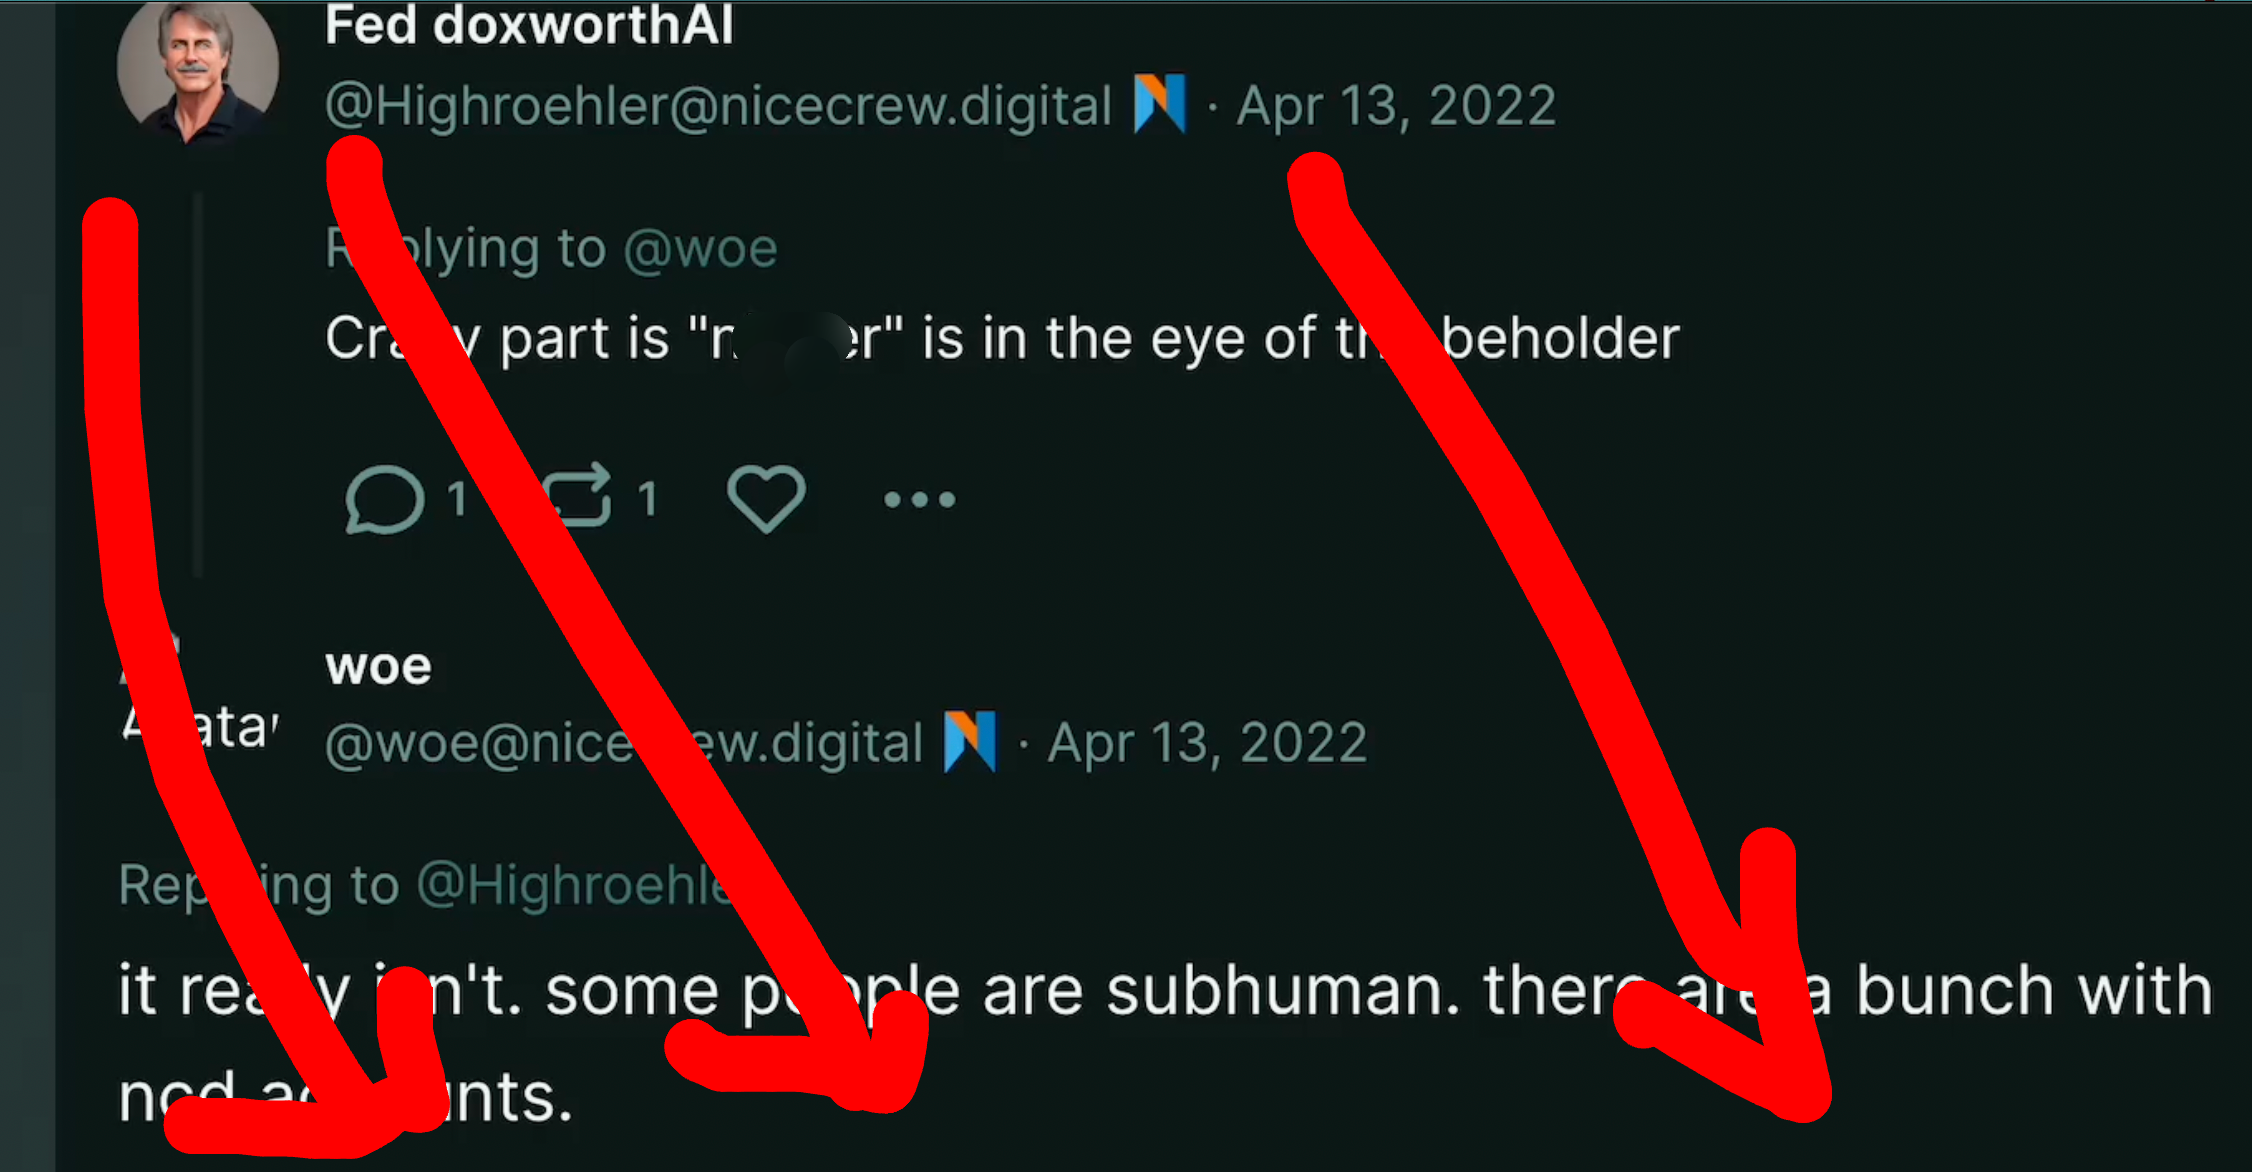 TW anti-Black racism. "Fed doxworthAI" on Poast: "Crazy part is that n****r is in the eye of the beholder." Reply from Dumperth/Woe: "it really isn't. some people are subhuman. there are a bunch with ncd (nice crew digital) accounts."